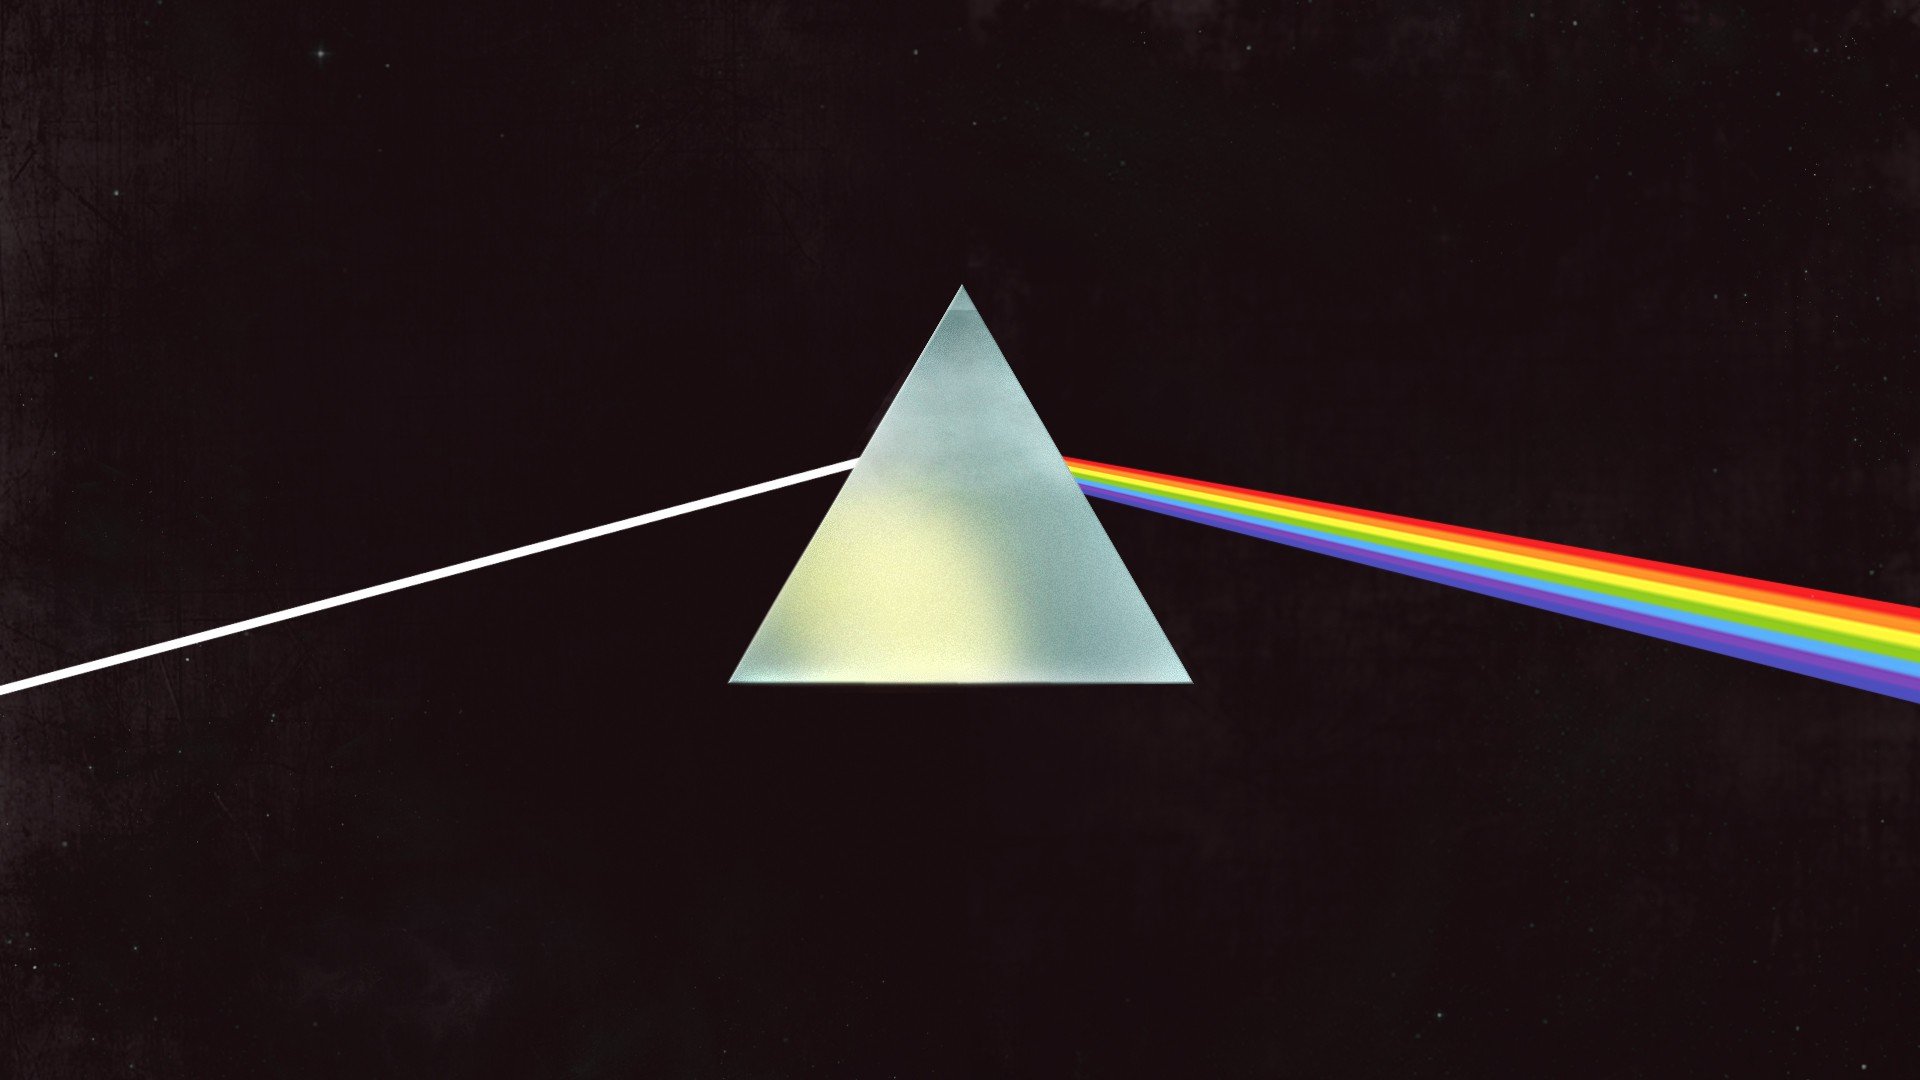 Album Cover, Triangle, Graphics, Darkness, Pink Floyd - Dark Side Of The Moon Album Cover Hd , HD Wallpaper & Backgrounds